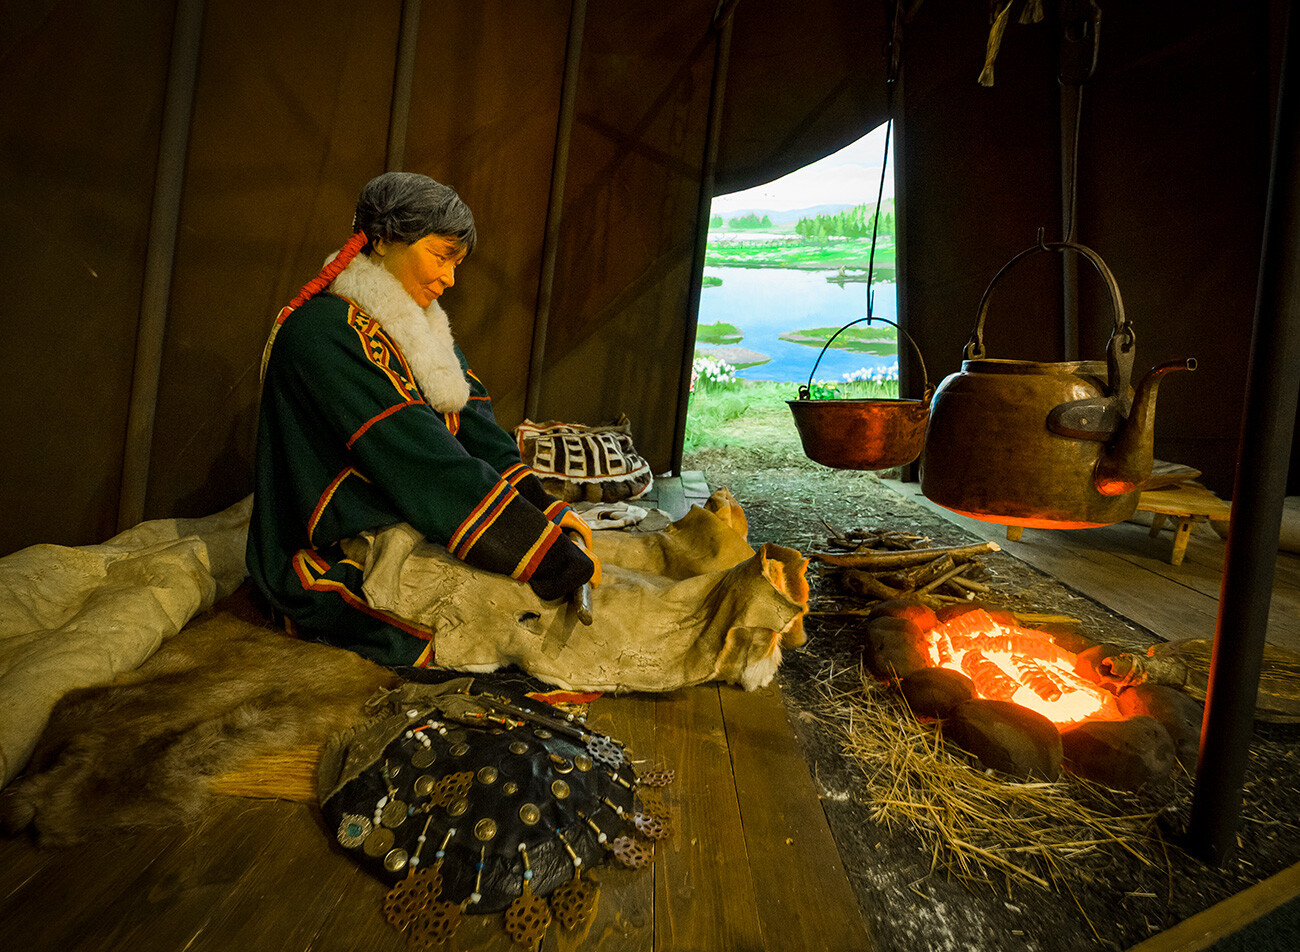 The museum collects everyday items of the Taymyr peoples.